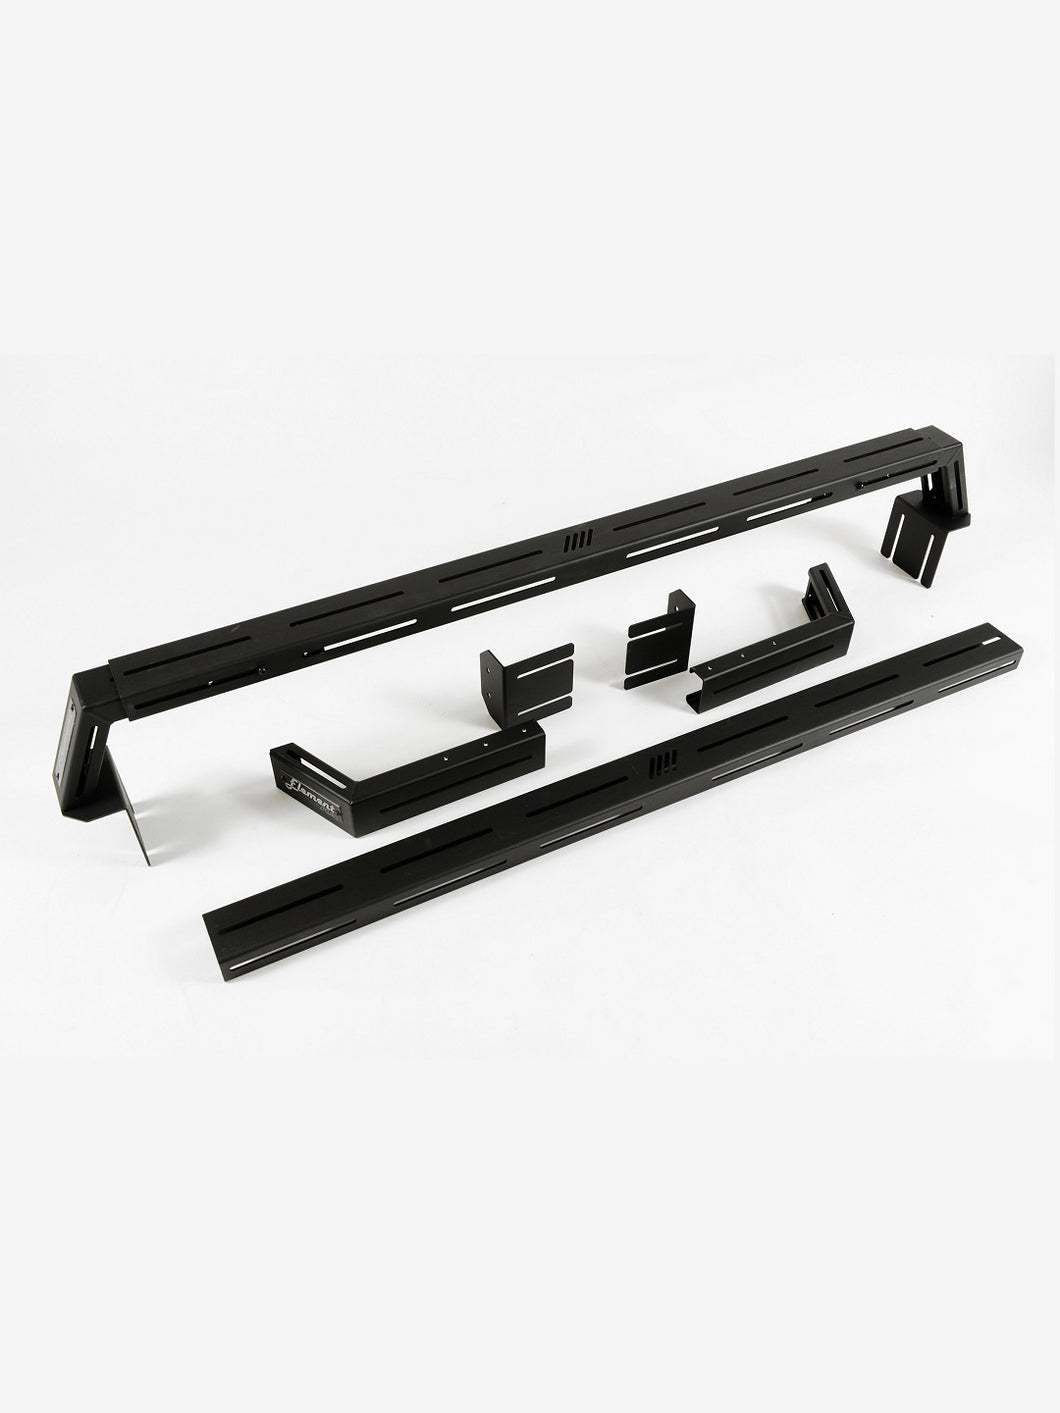 Pictured are two black, 6-inch aluminum crossbars. One is fully assembled and the other is neatly disassembled. This is the Universal Bed Crossbar Kit, perfect for any truck bed in your overland roof top tent camping! Available for sale by SMRT Tent in Edmonton, Canada.